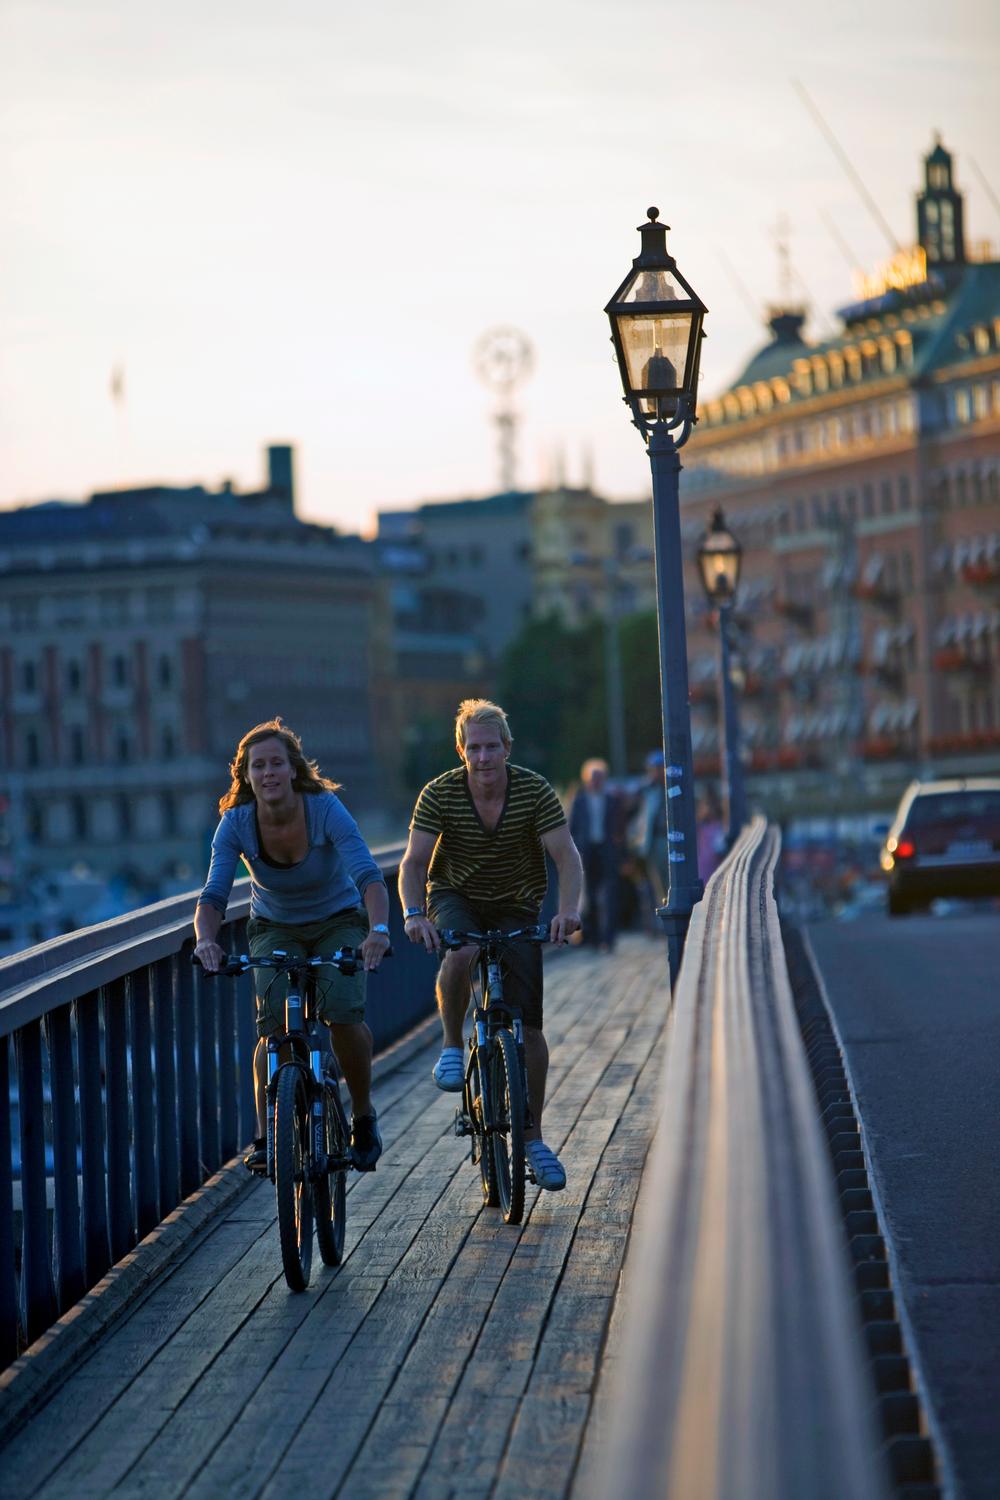 Stockholm launched its successful bicycle 
borrow and return project back in 2006 / Photo: © HENRIK TRYGG - STOCKHOLM VISITORS BOARD